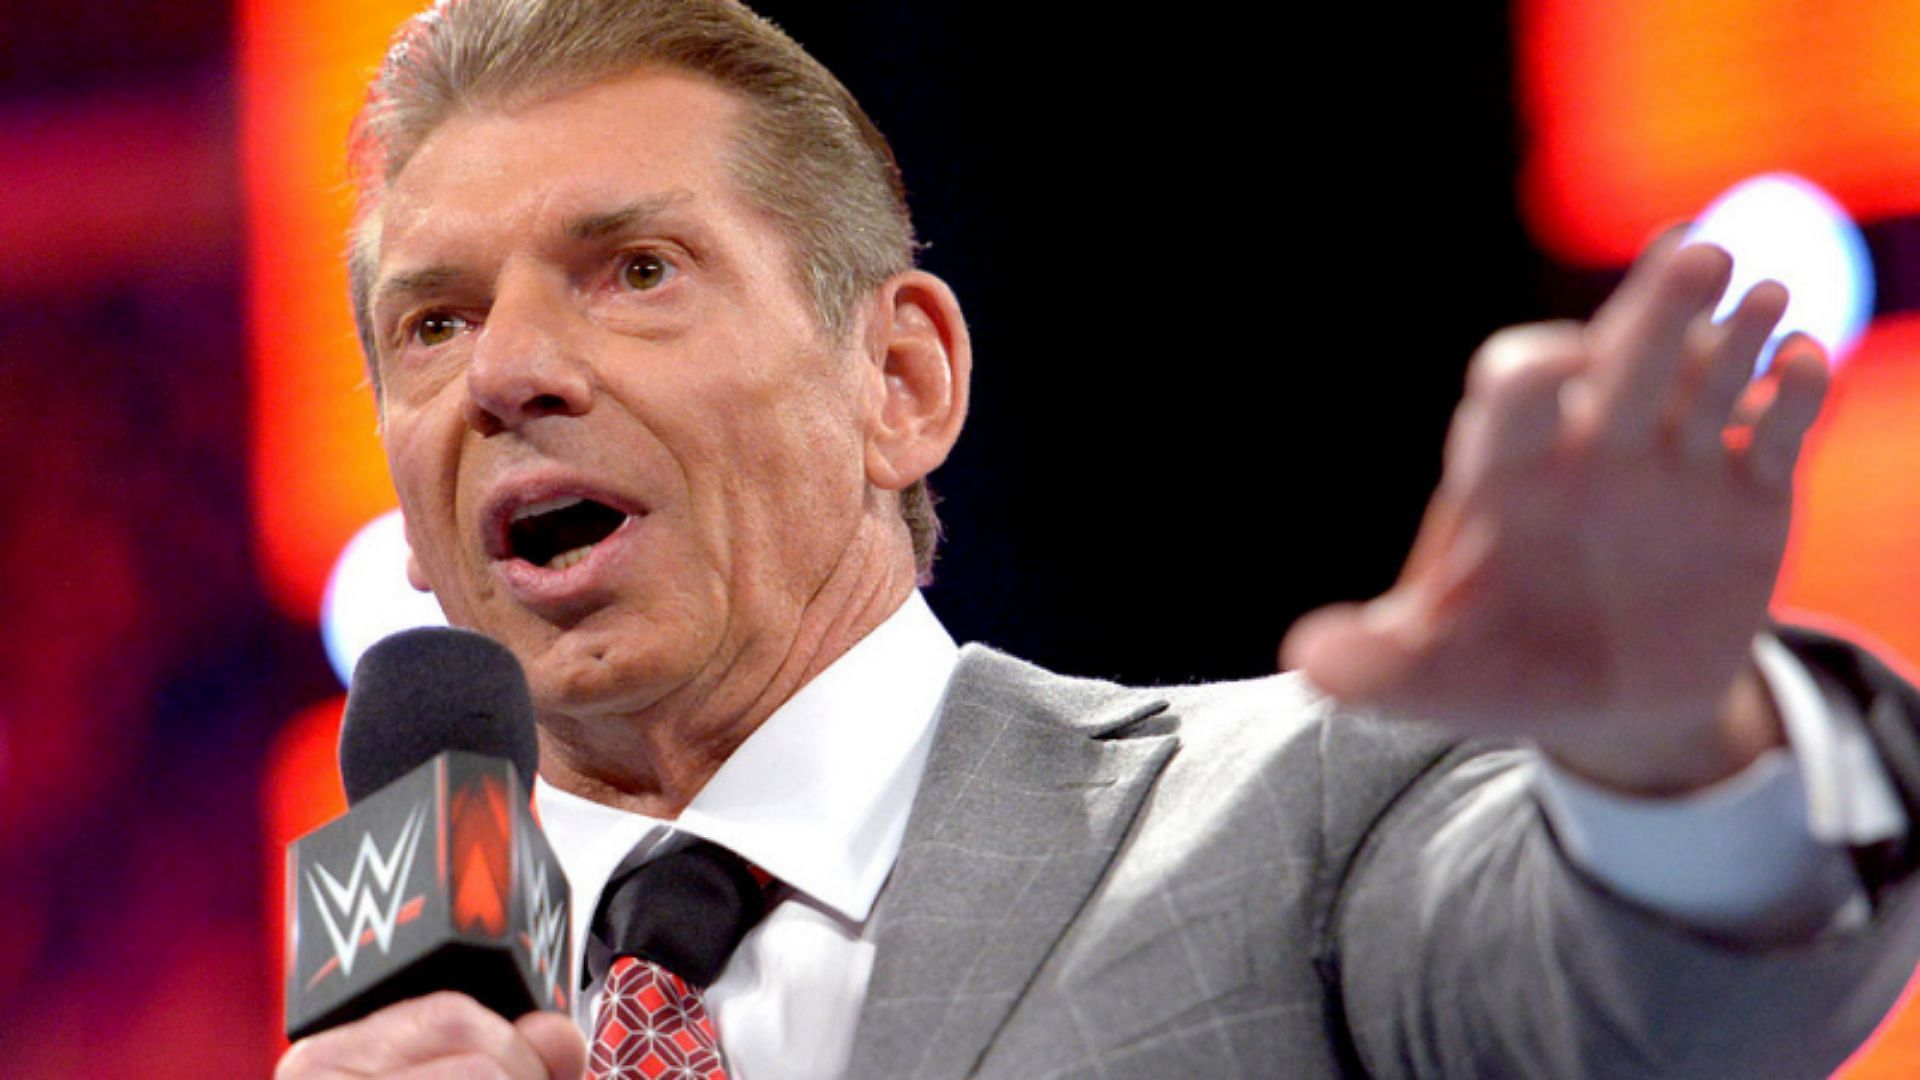 Vince McMahon can change WWE finishes via a headset during matches